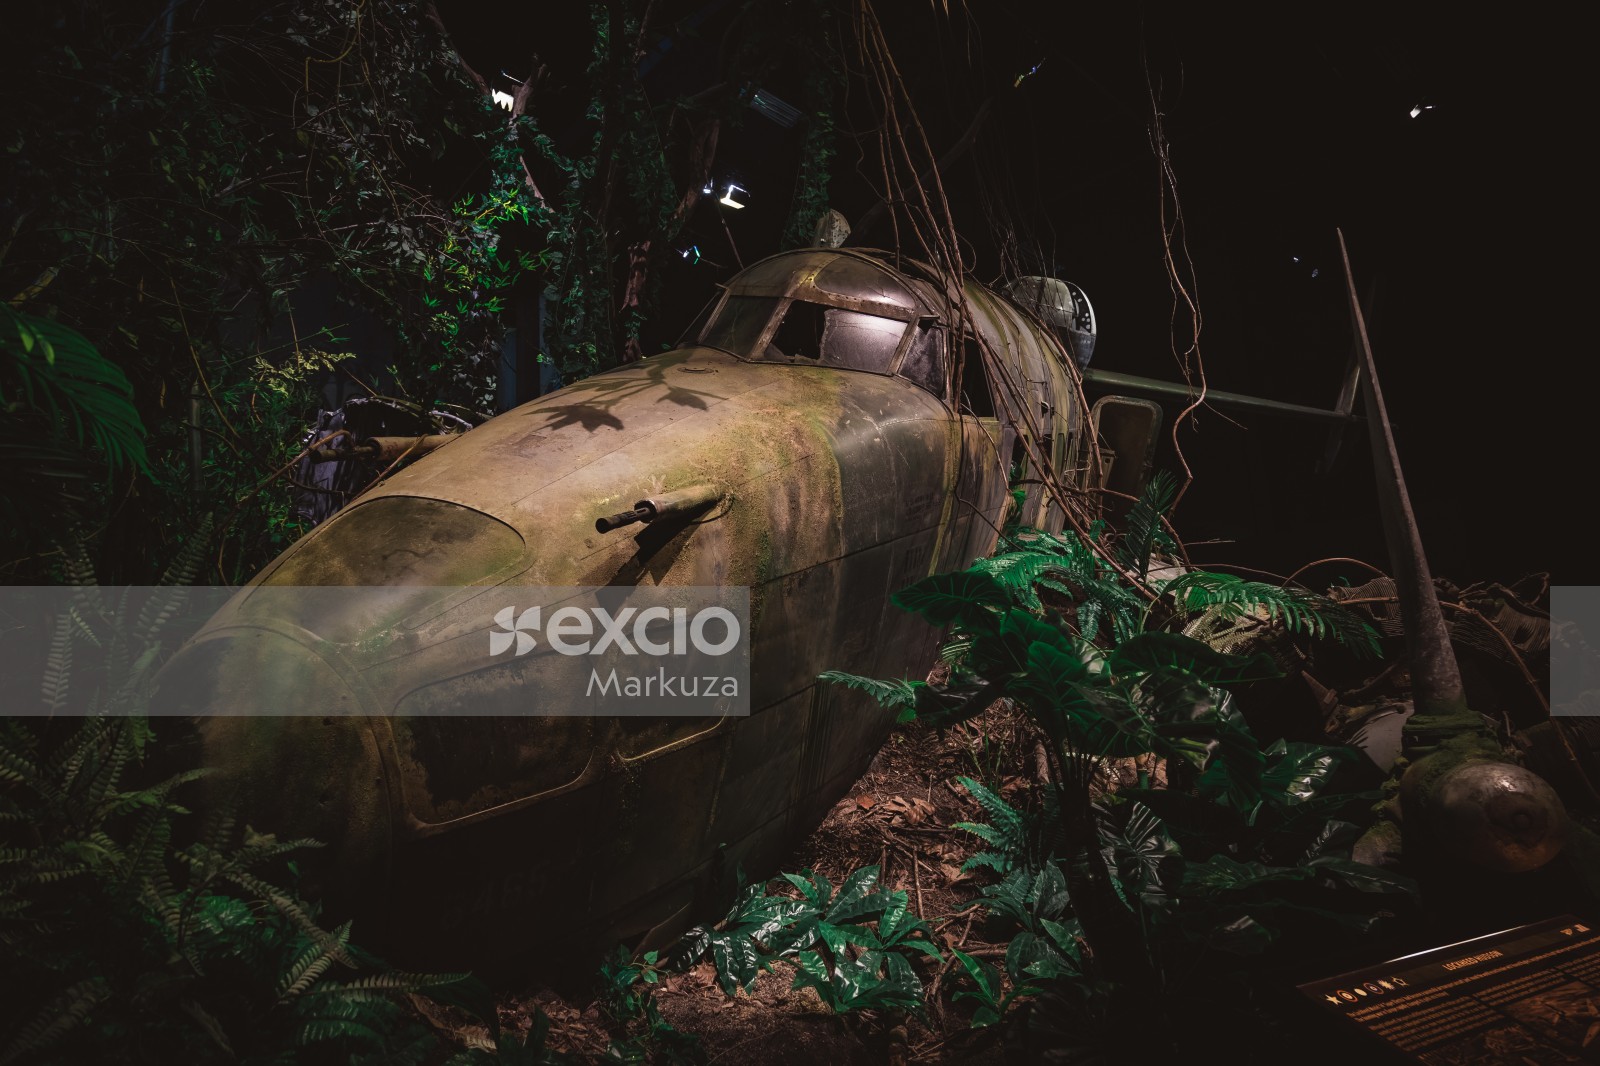 Old aircraft in the jungle